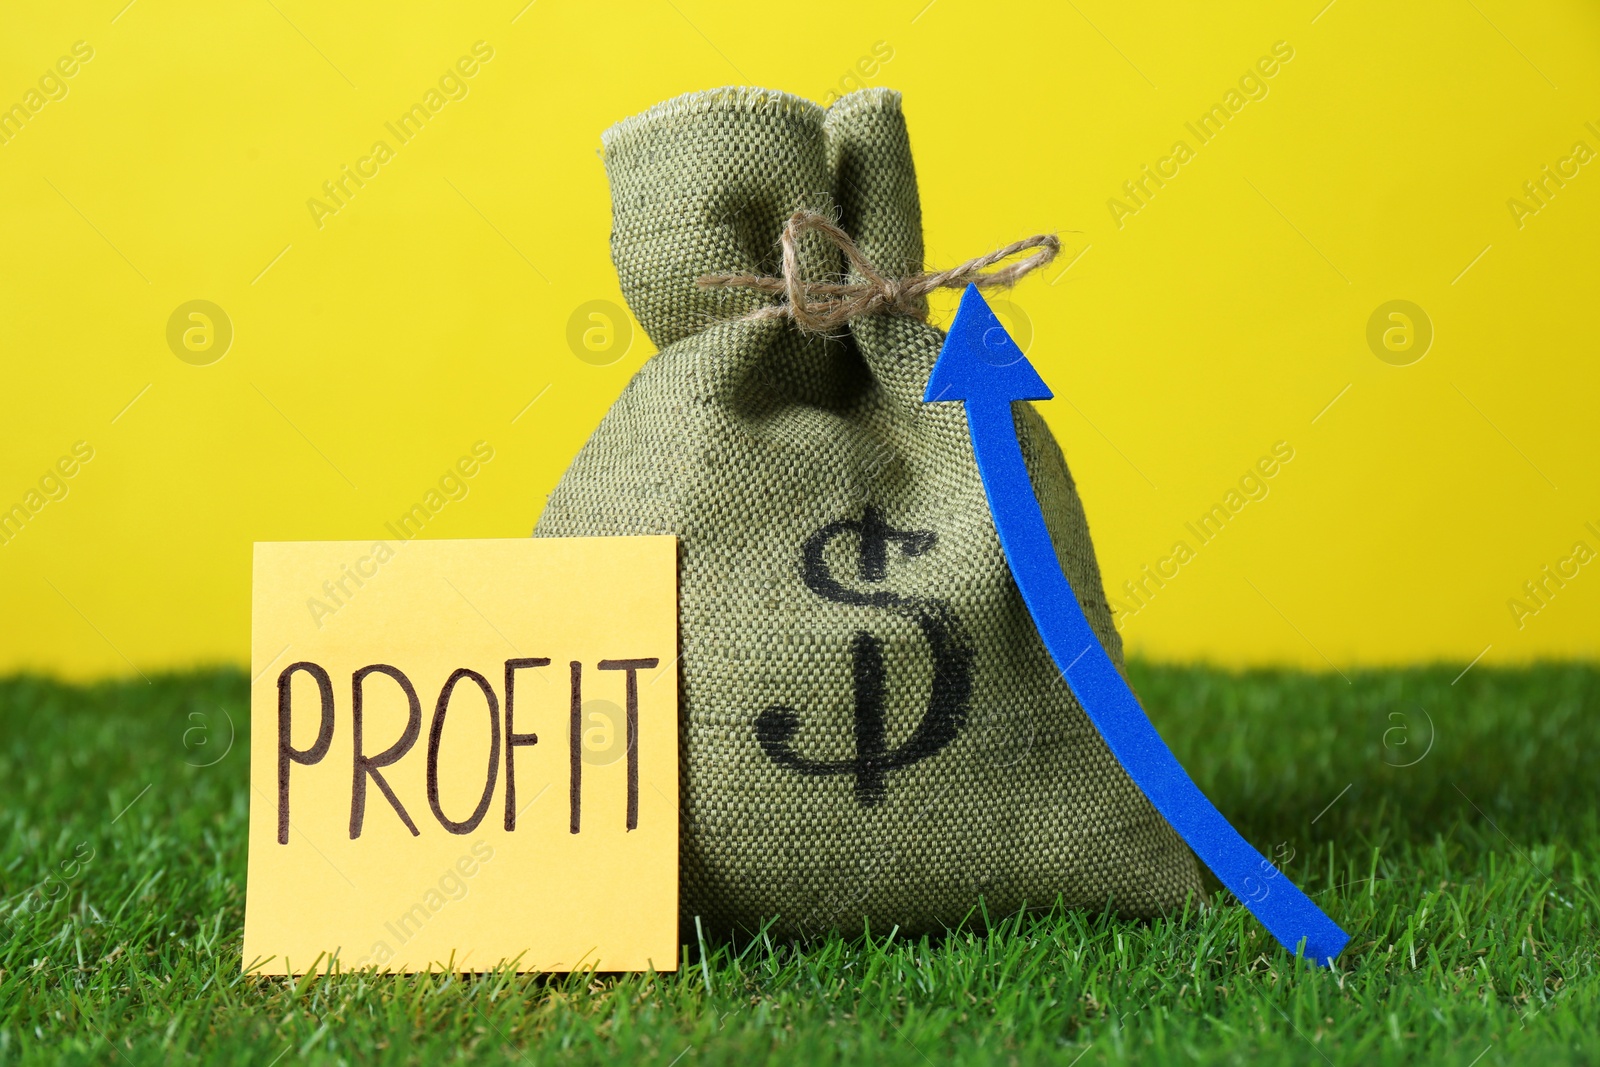 Photo of Sticky note with word Profit, money of bag and up arrow against yellow background